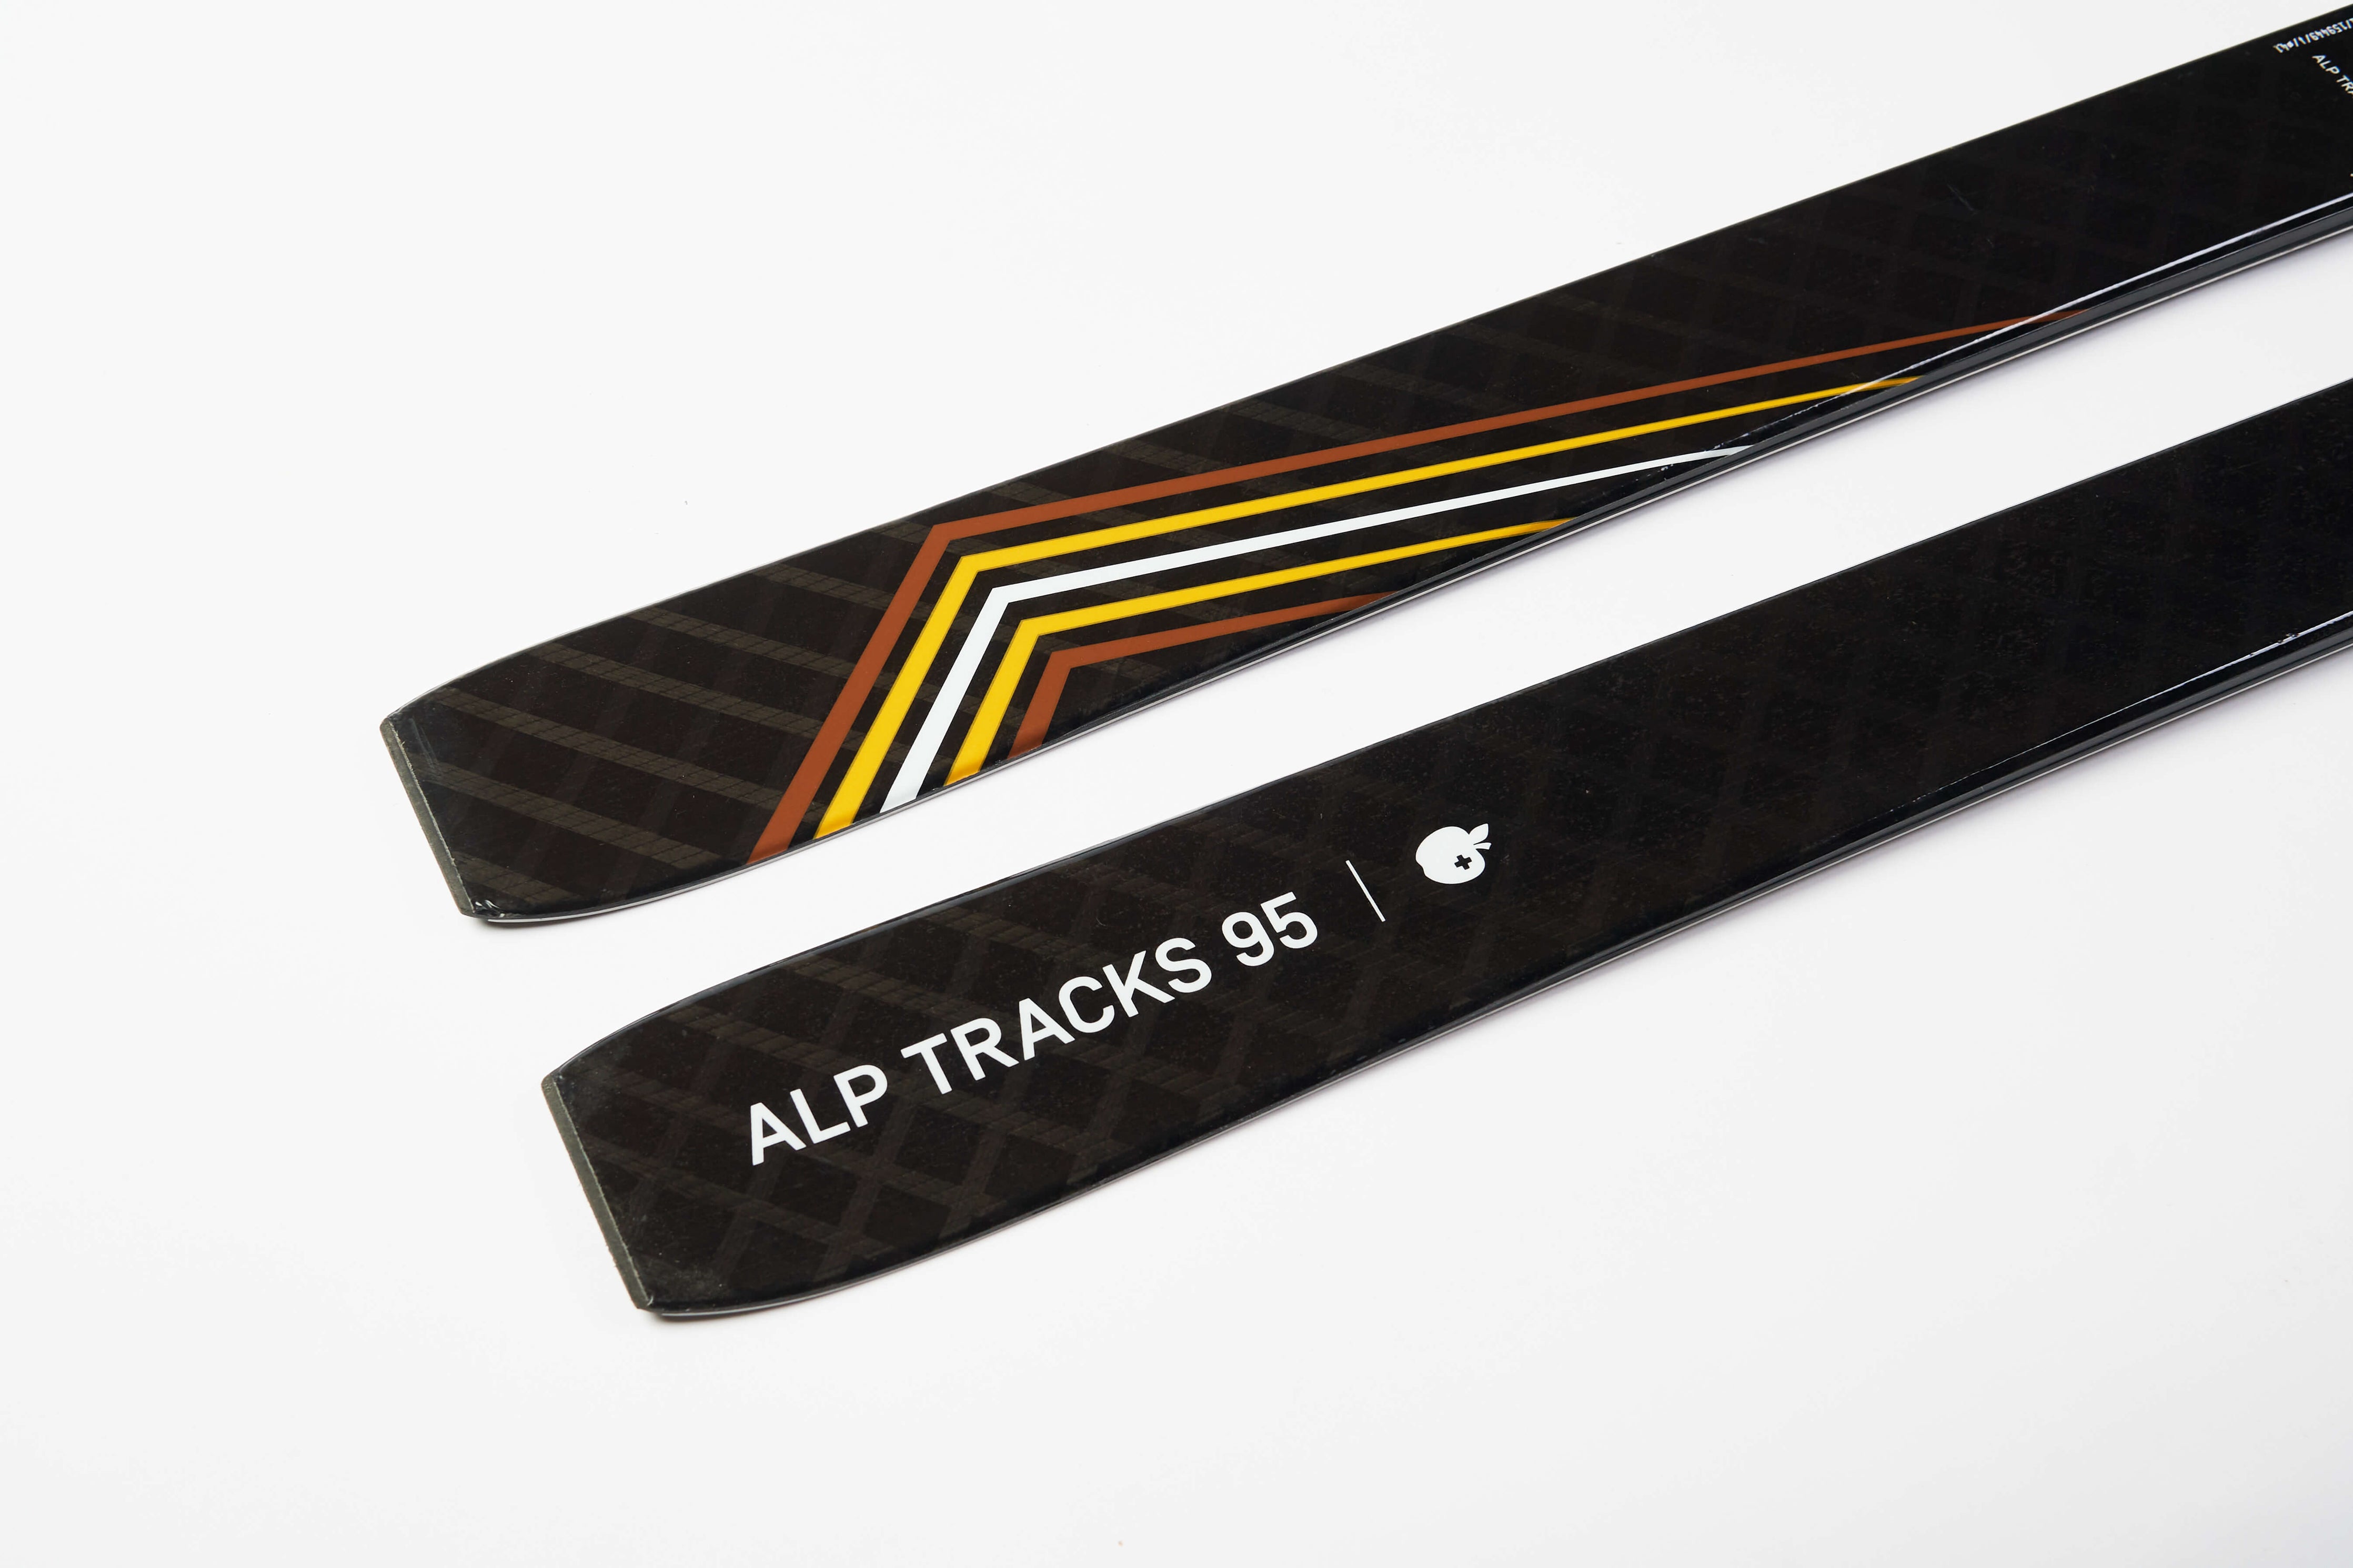 Explore new horizons with Movement's Alp Tracks 95 touring skis by my side.